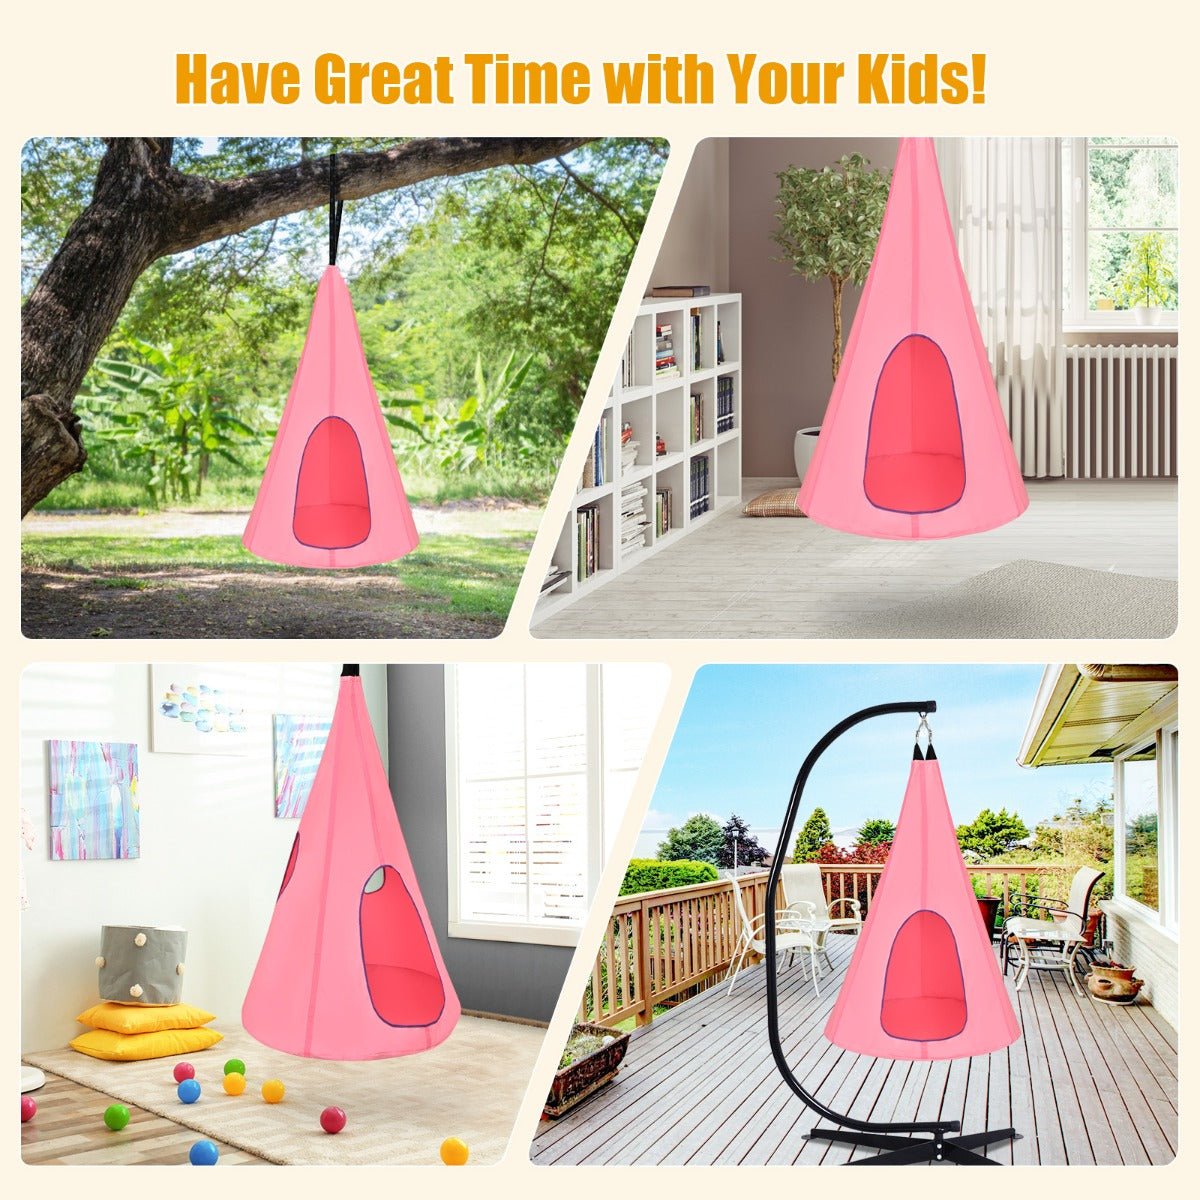 Swing and Play: Kids Nest Swing Tent Pink 80cm, A Cozy Retreat